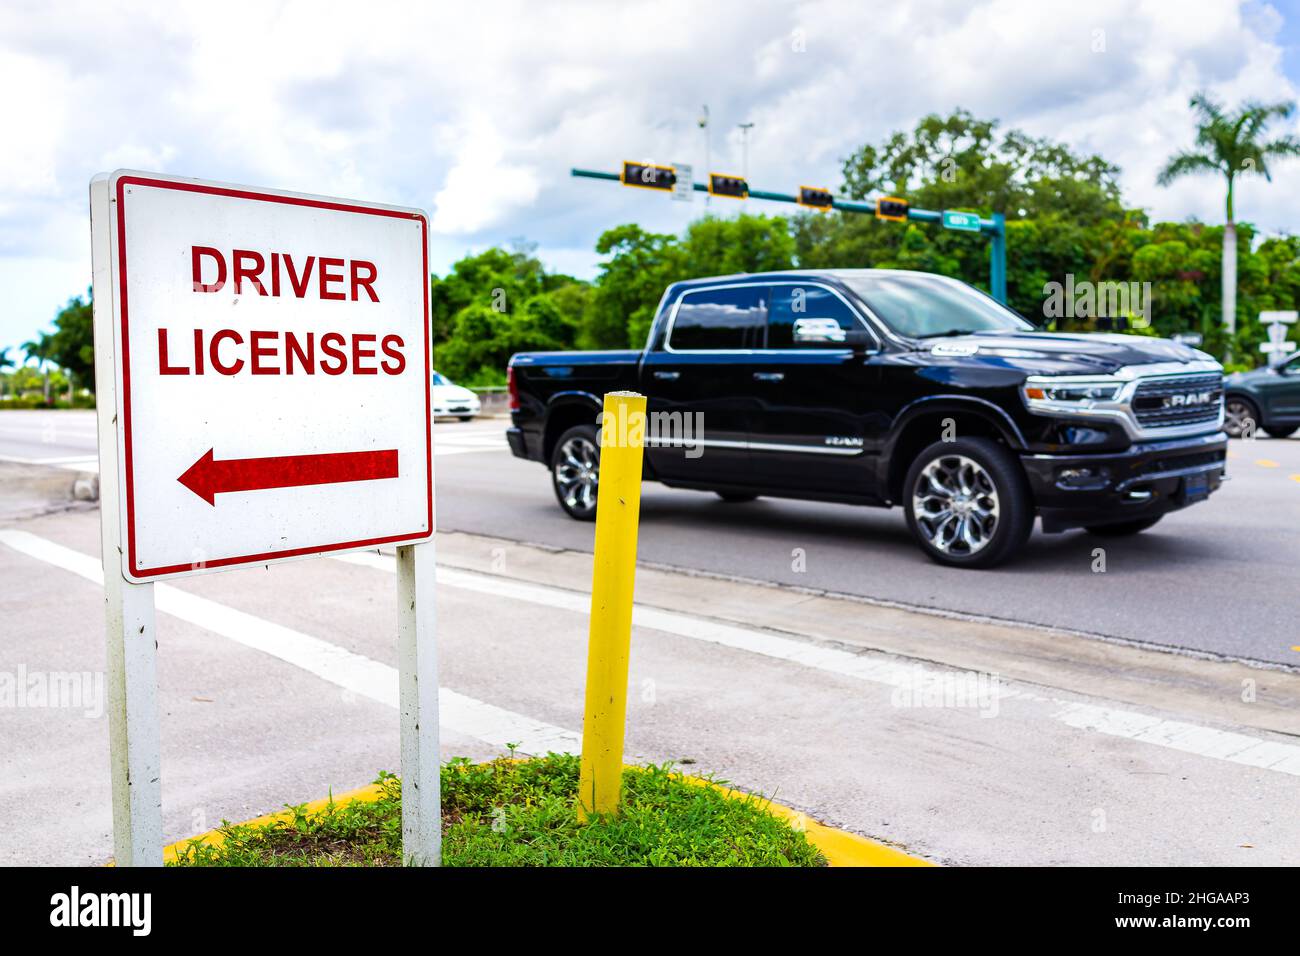 Naples, Florida - August 9, 2021: Downtown street road with car and roadside sign signpost for directions to driver license office for renewal Stock Photo